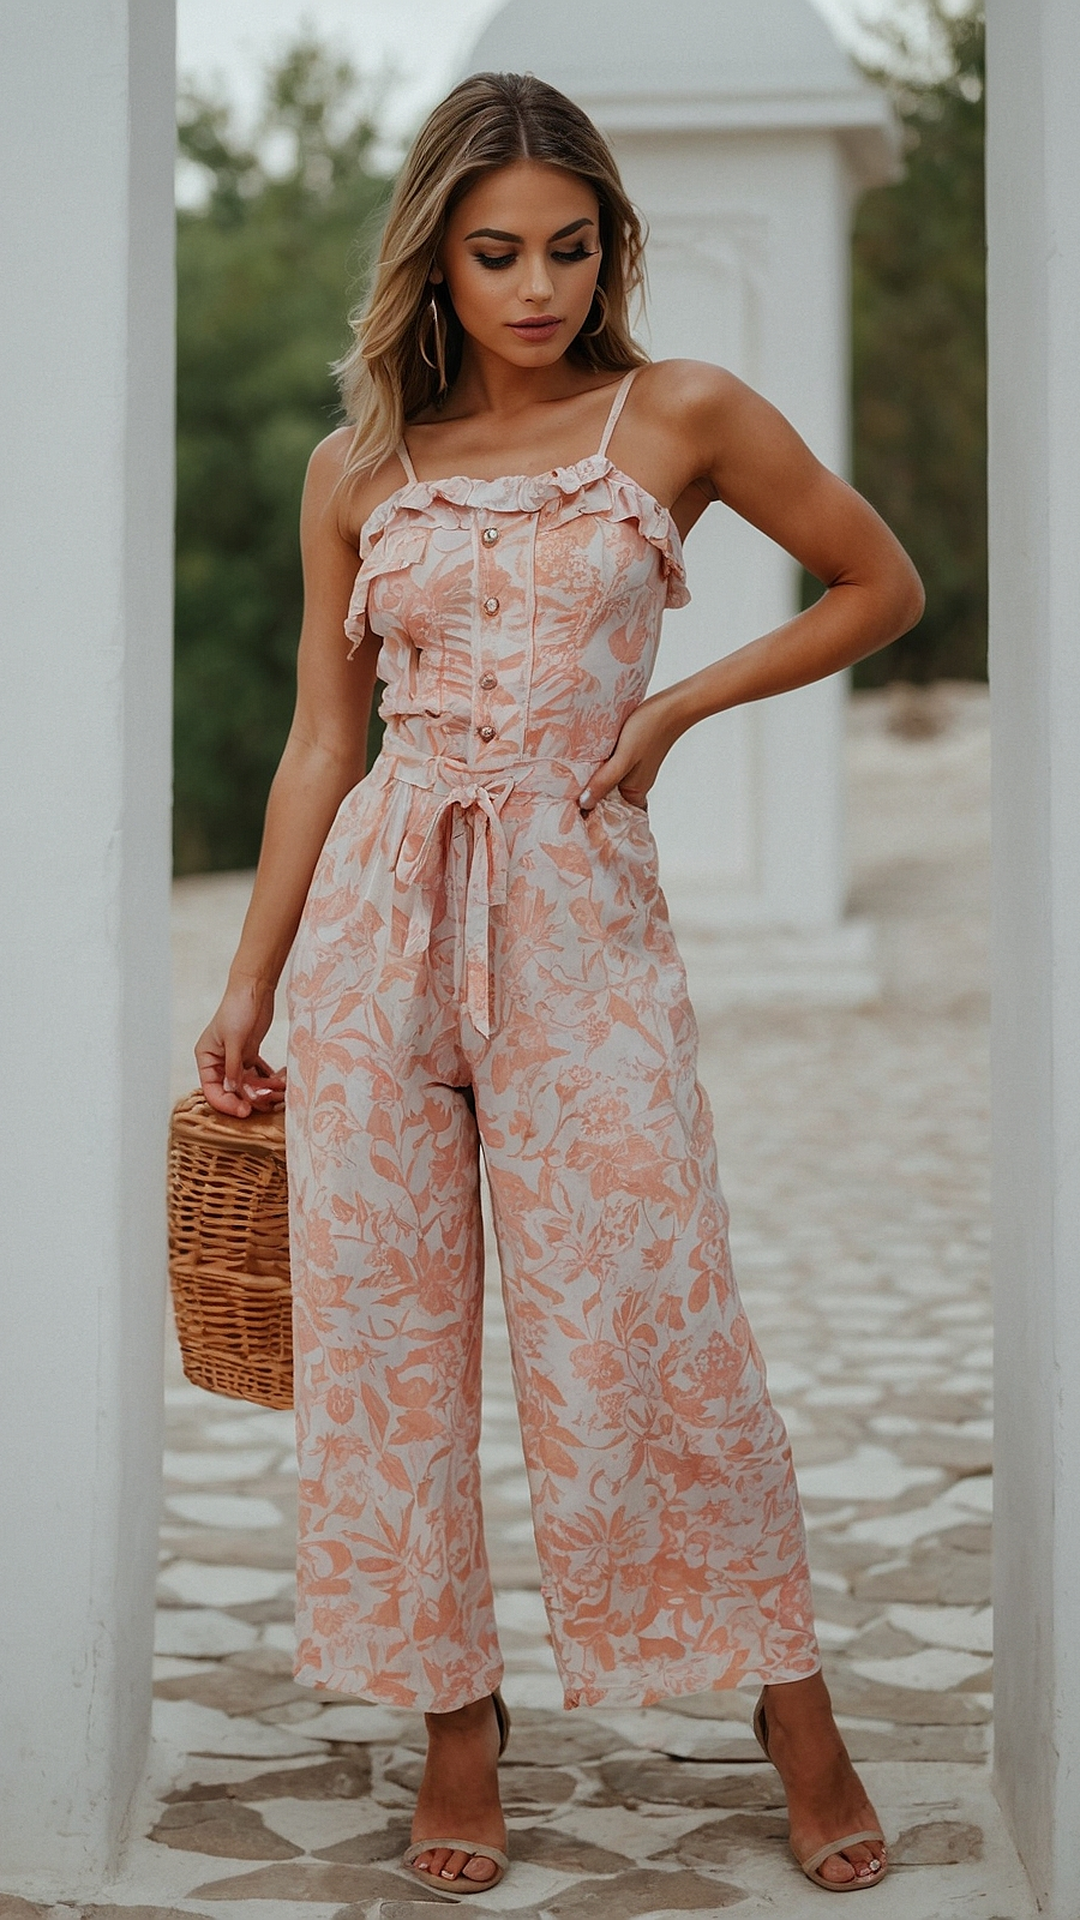 Picnic Day: Inspiring Women's Outfit Ideas